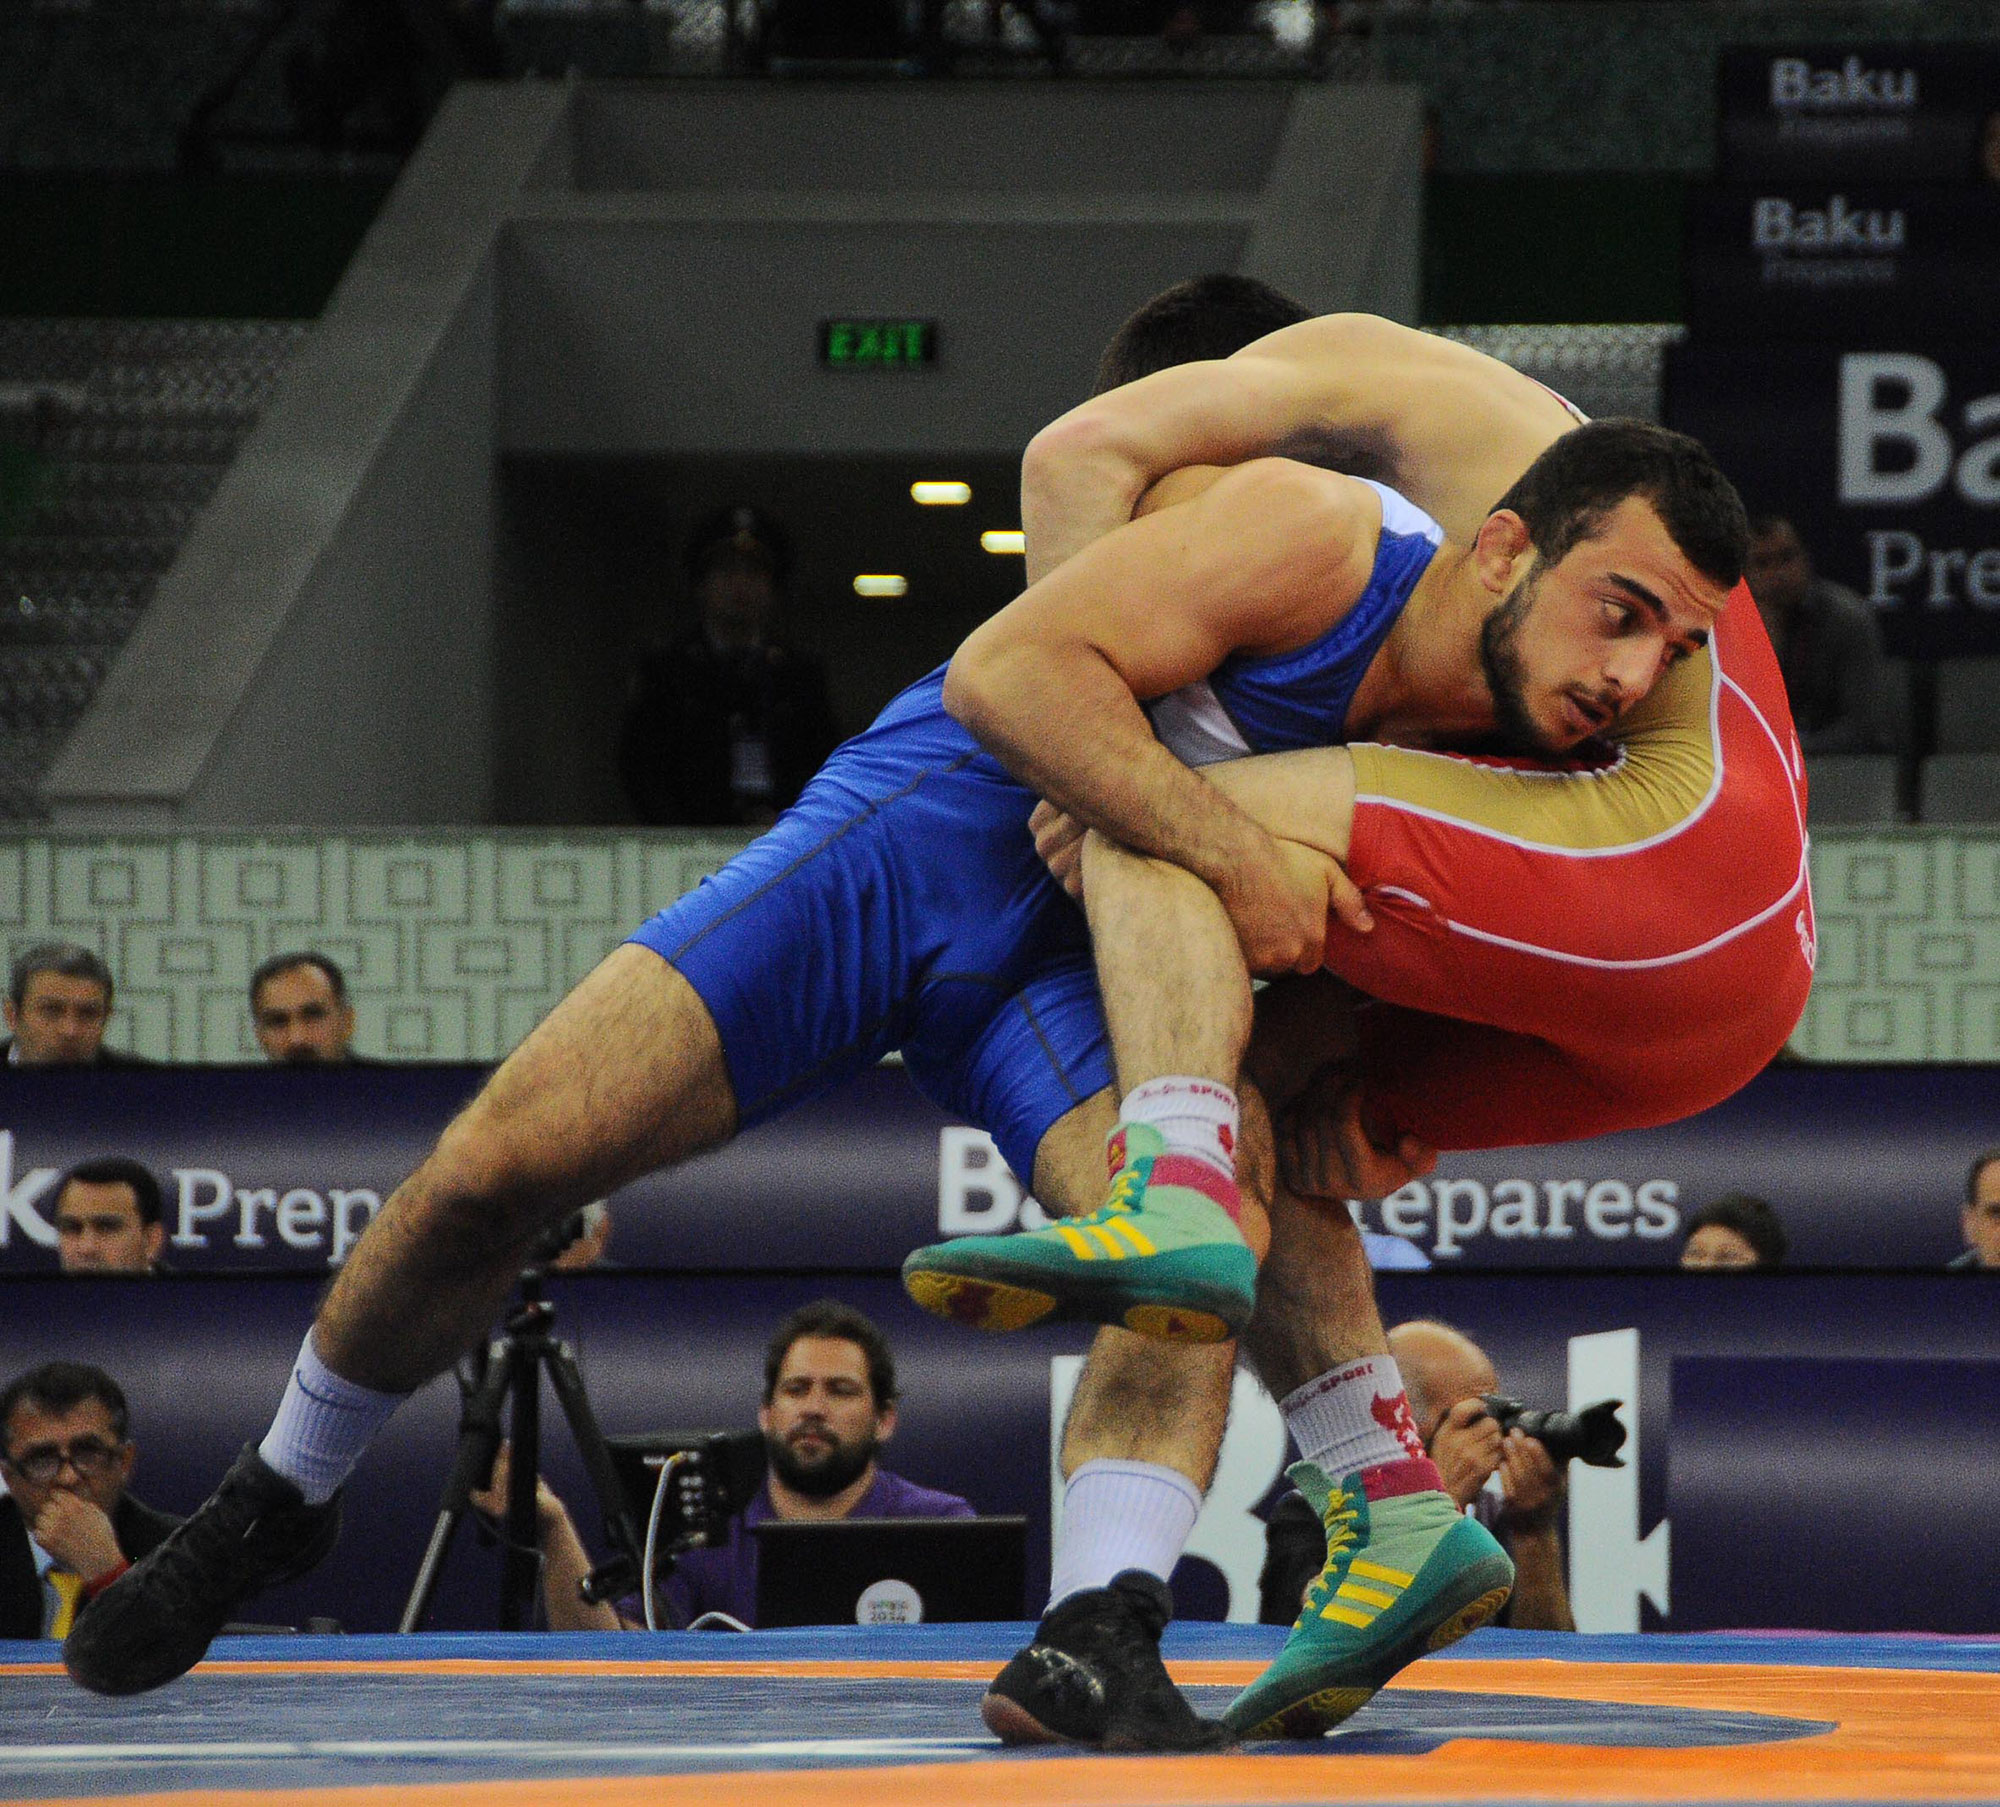 Baku 2015 successfully finalizes test events